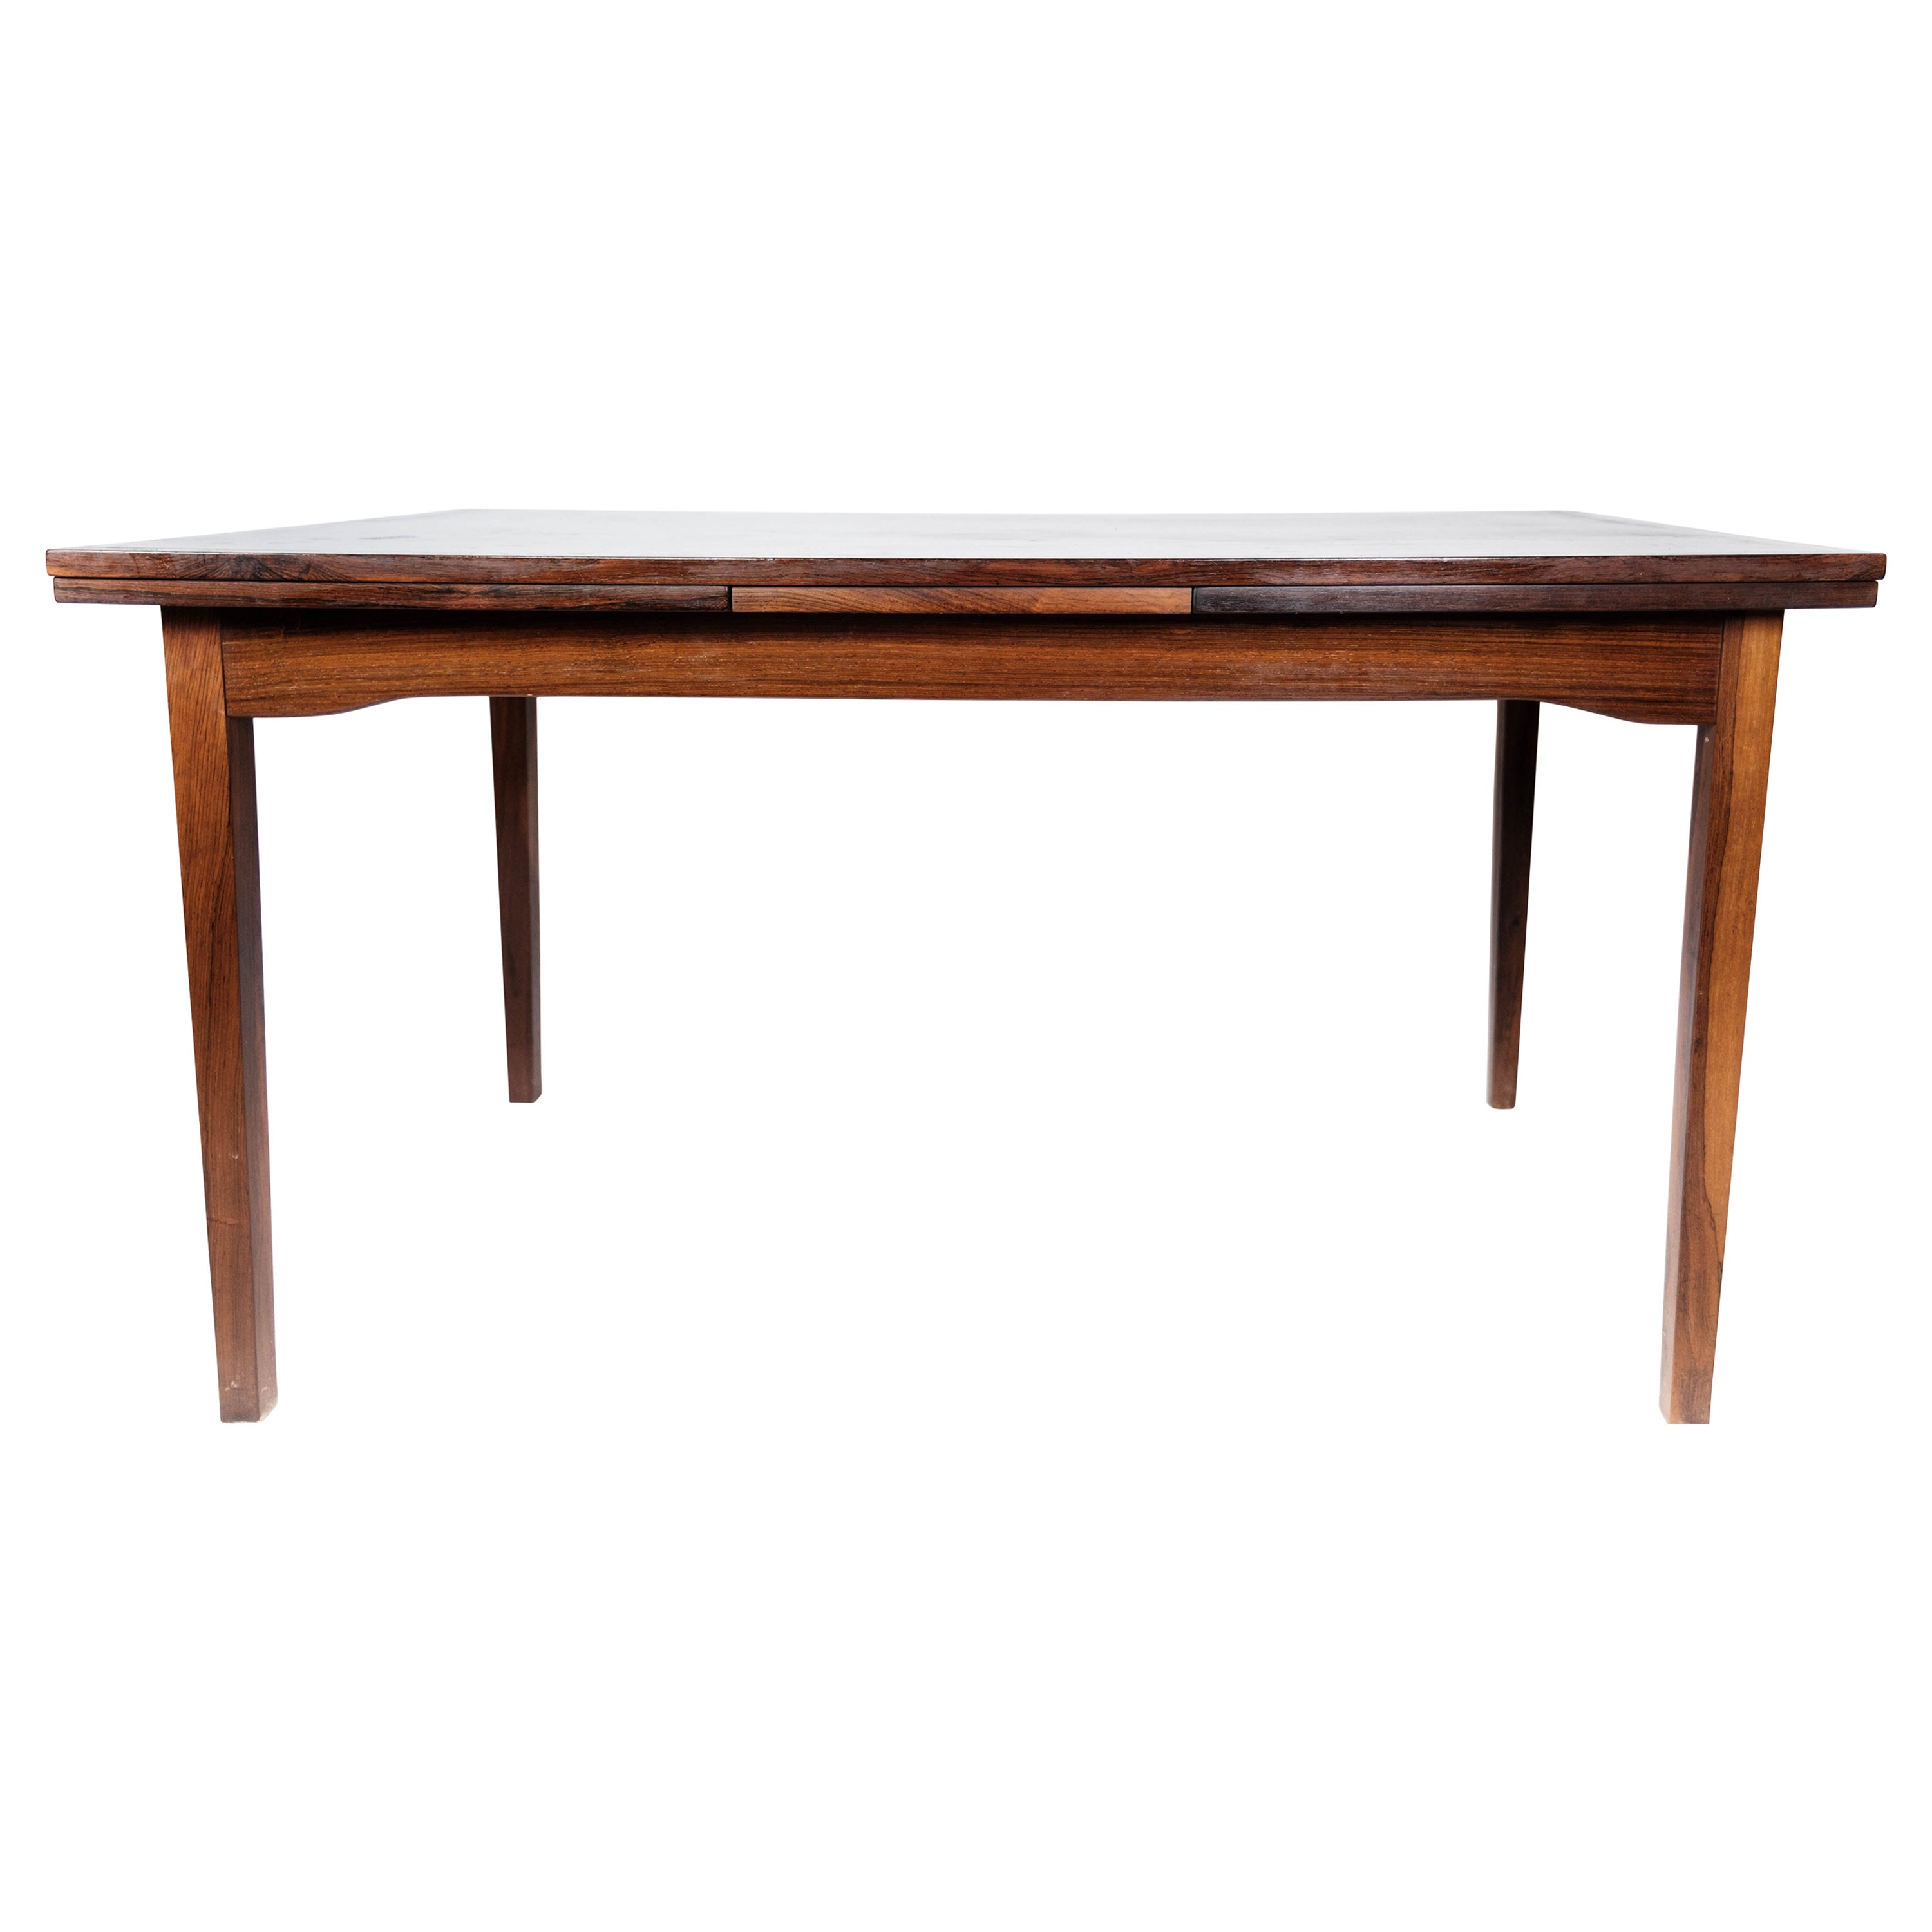 Dining Table in Rosewood with Extension, of Danish Design by Ellegaard, 1960s